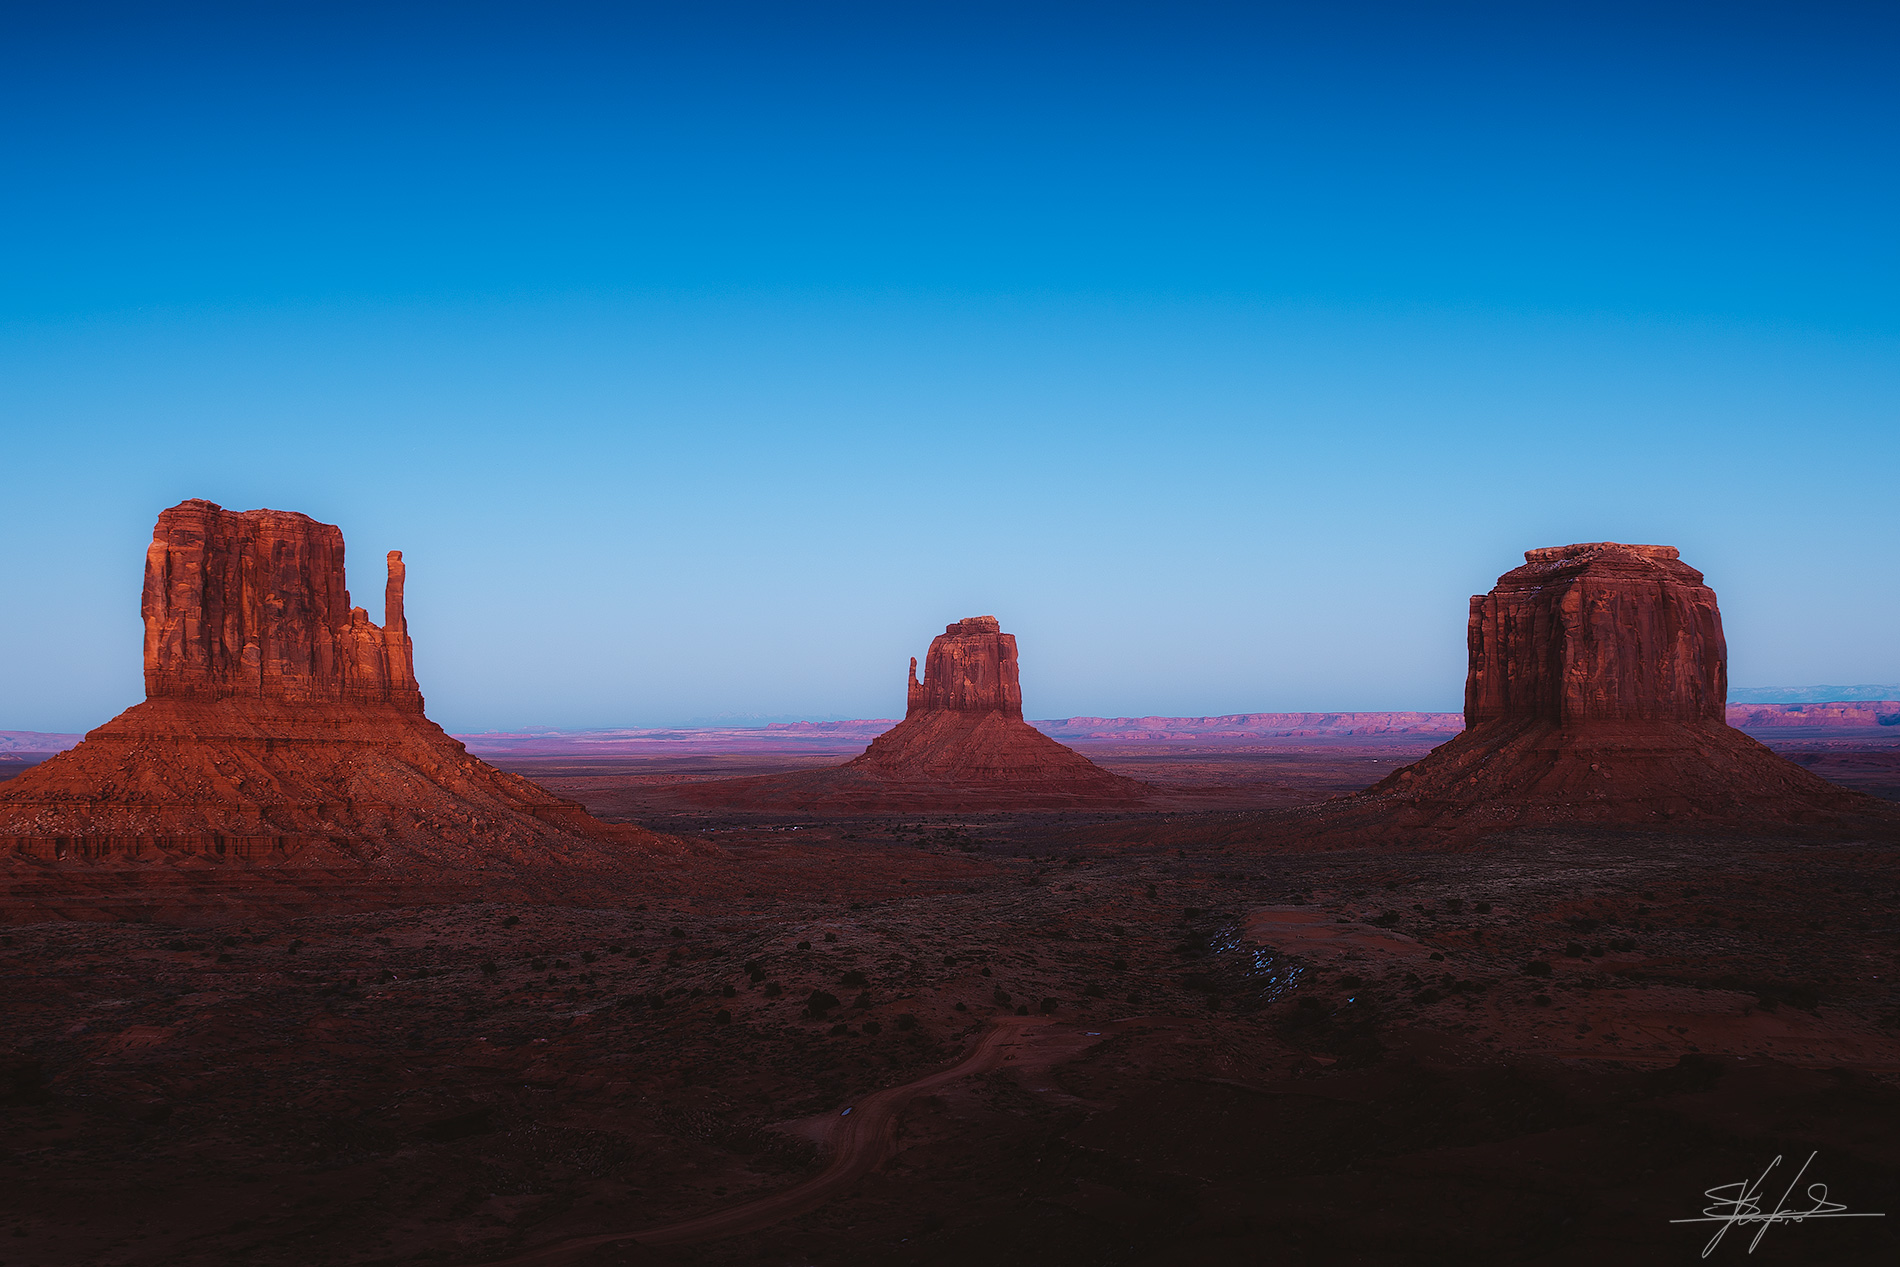 Sunset at the Monument Valley